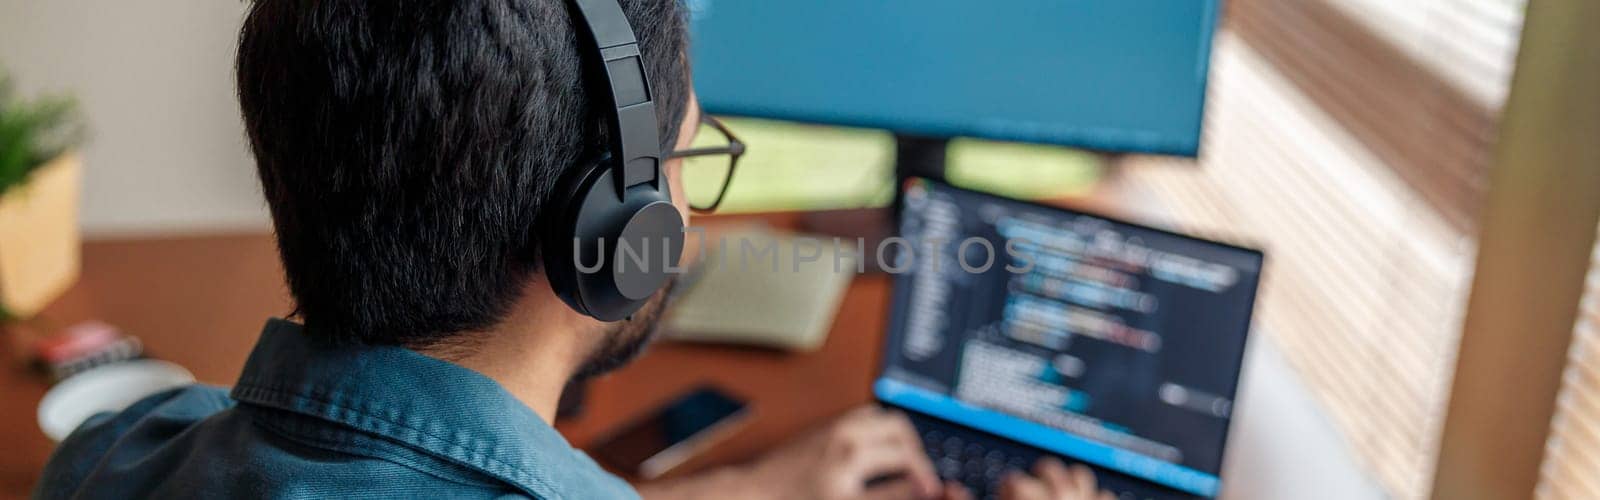 Back view of man in headphones freelance data scientist work remotely at home. High quality photo